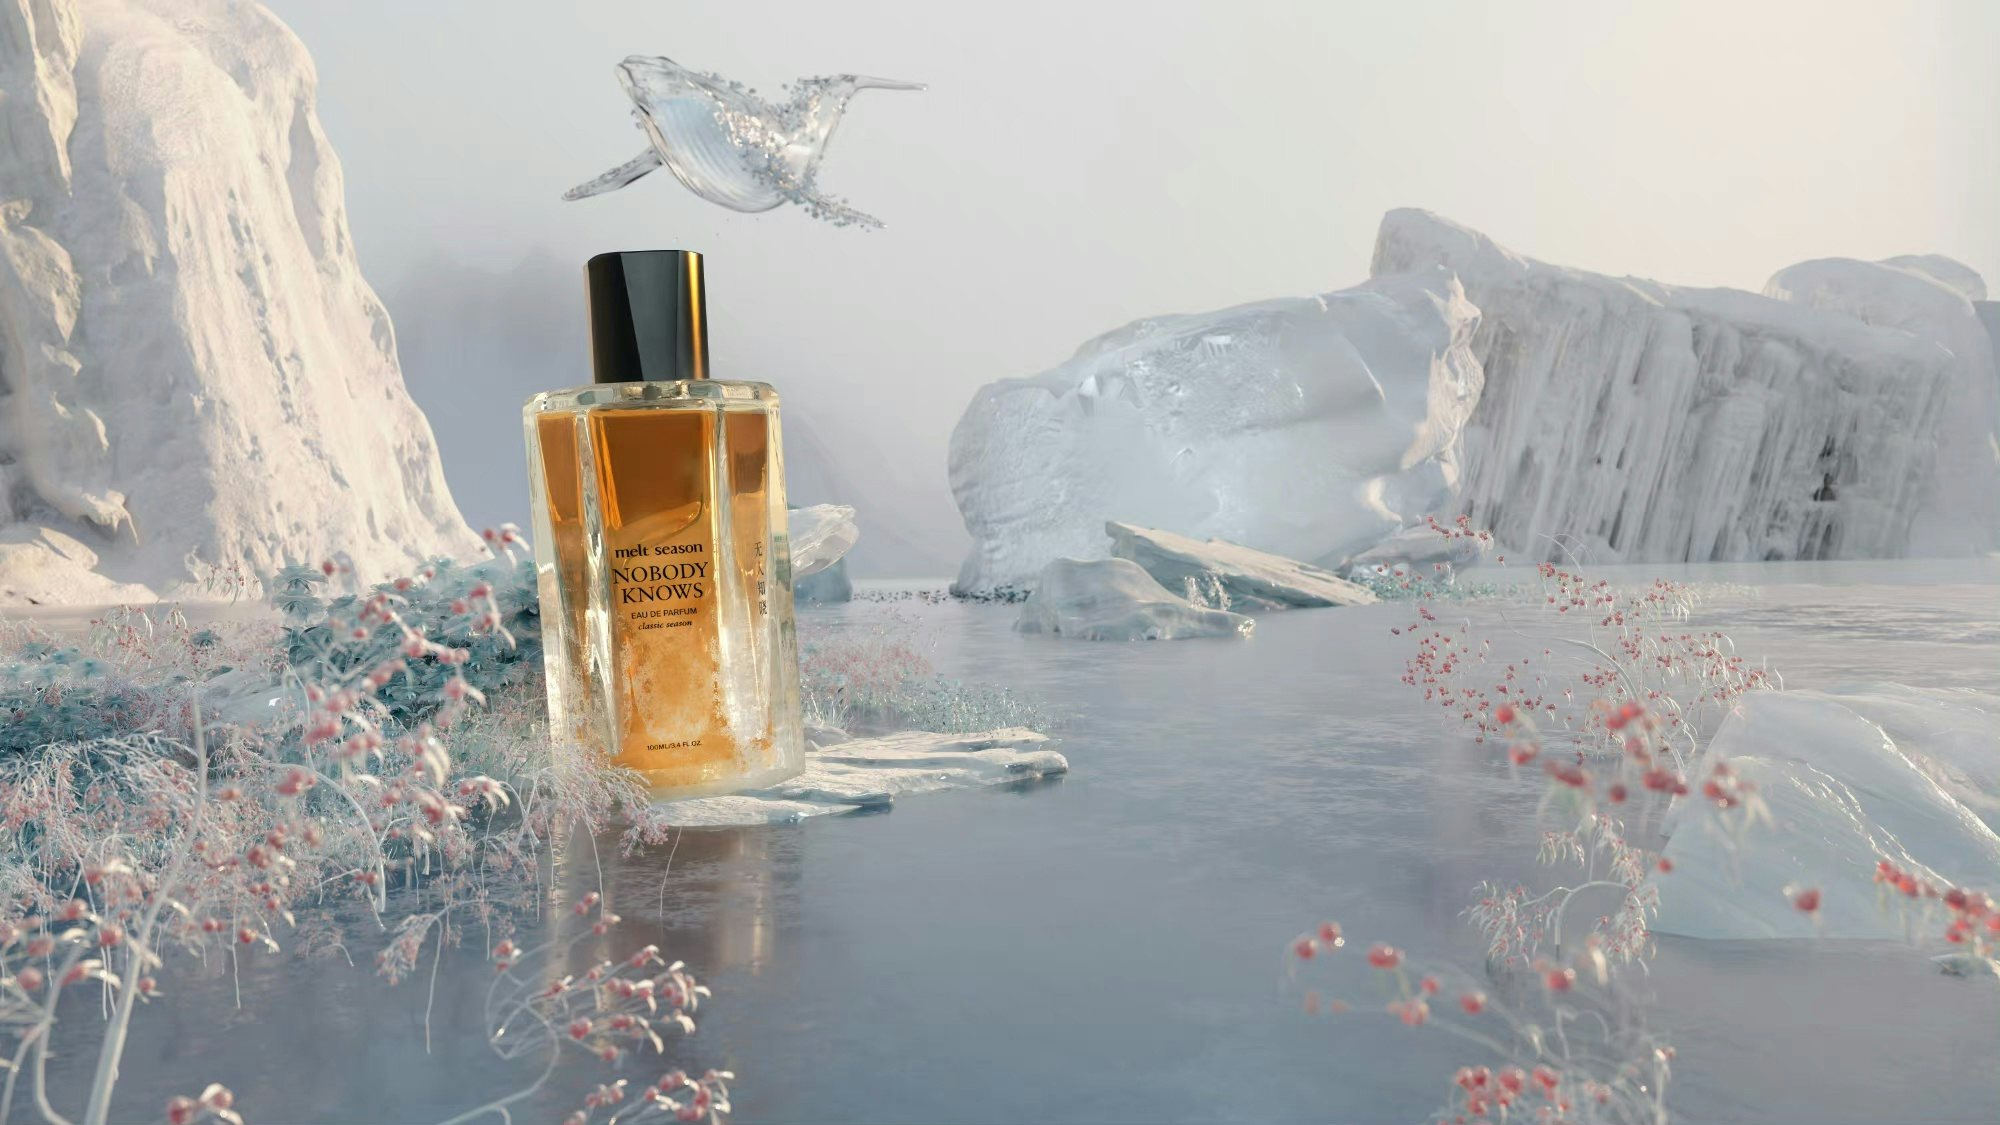 Gabby YJ Chen looks at three Chinese fragrance labels — Documents, To Summer, and Melt Season — ready to enter the international market. Which will be the first to smell worldwide success? Photo: Melt Season